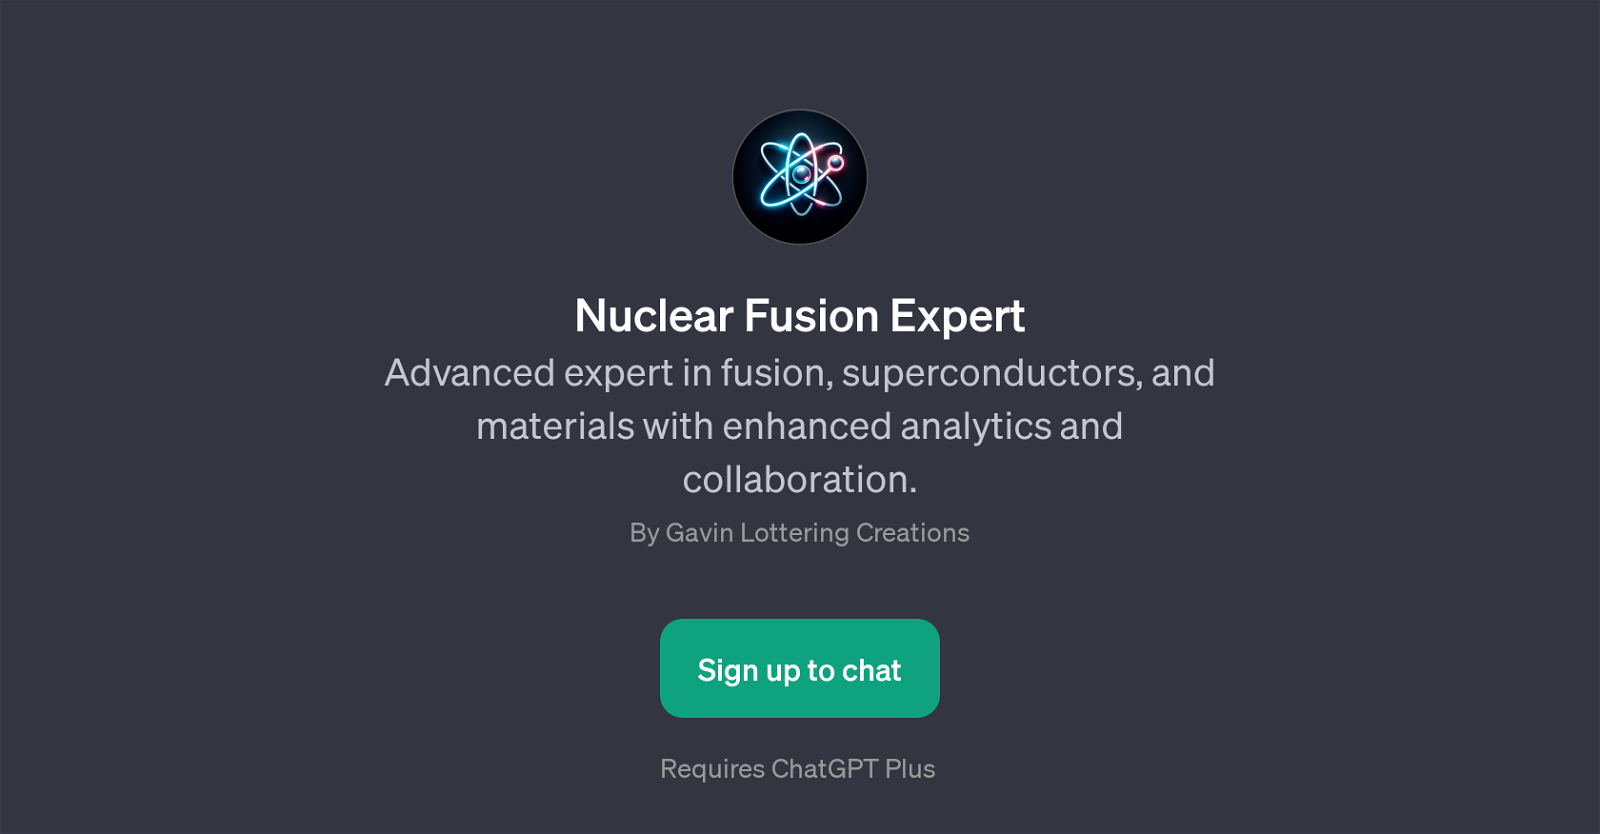 Nuclear Fusion Expert website